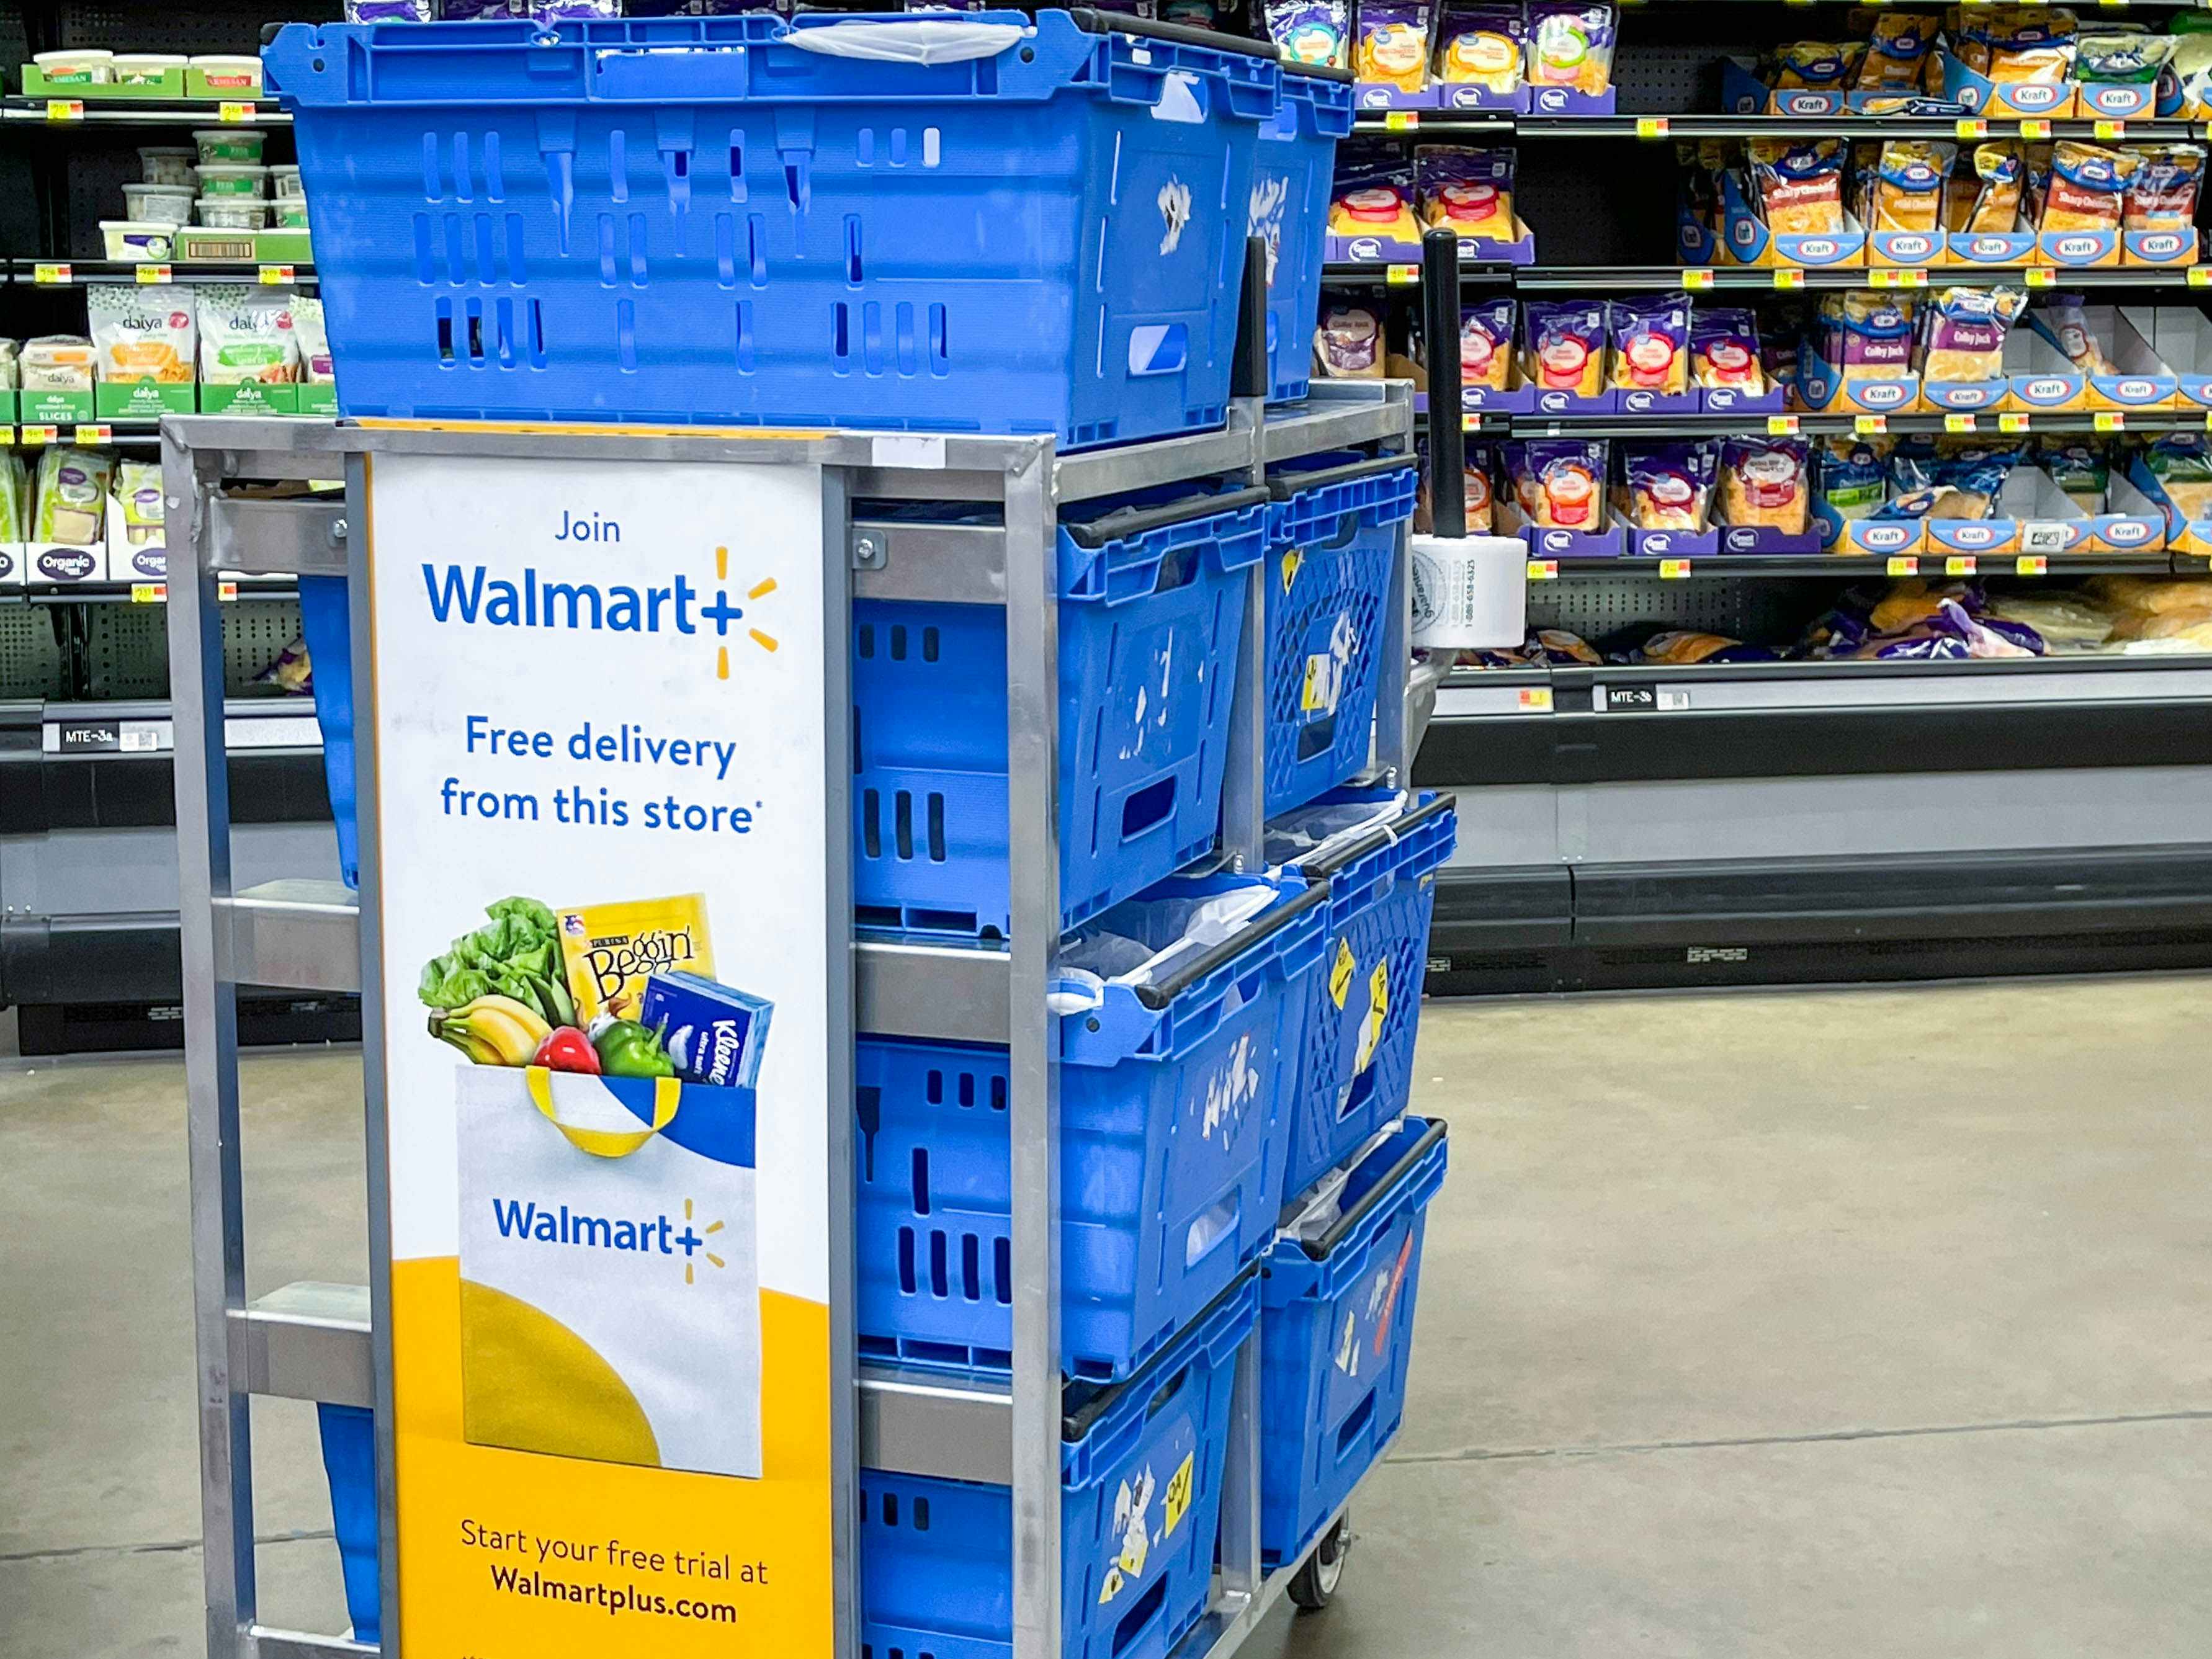 walmart plus sign in store on employee basket advertising free delivery and free trial of Walmart plus